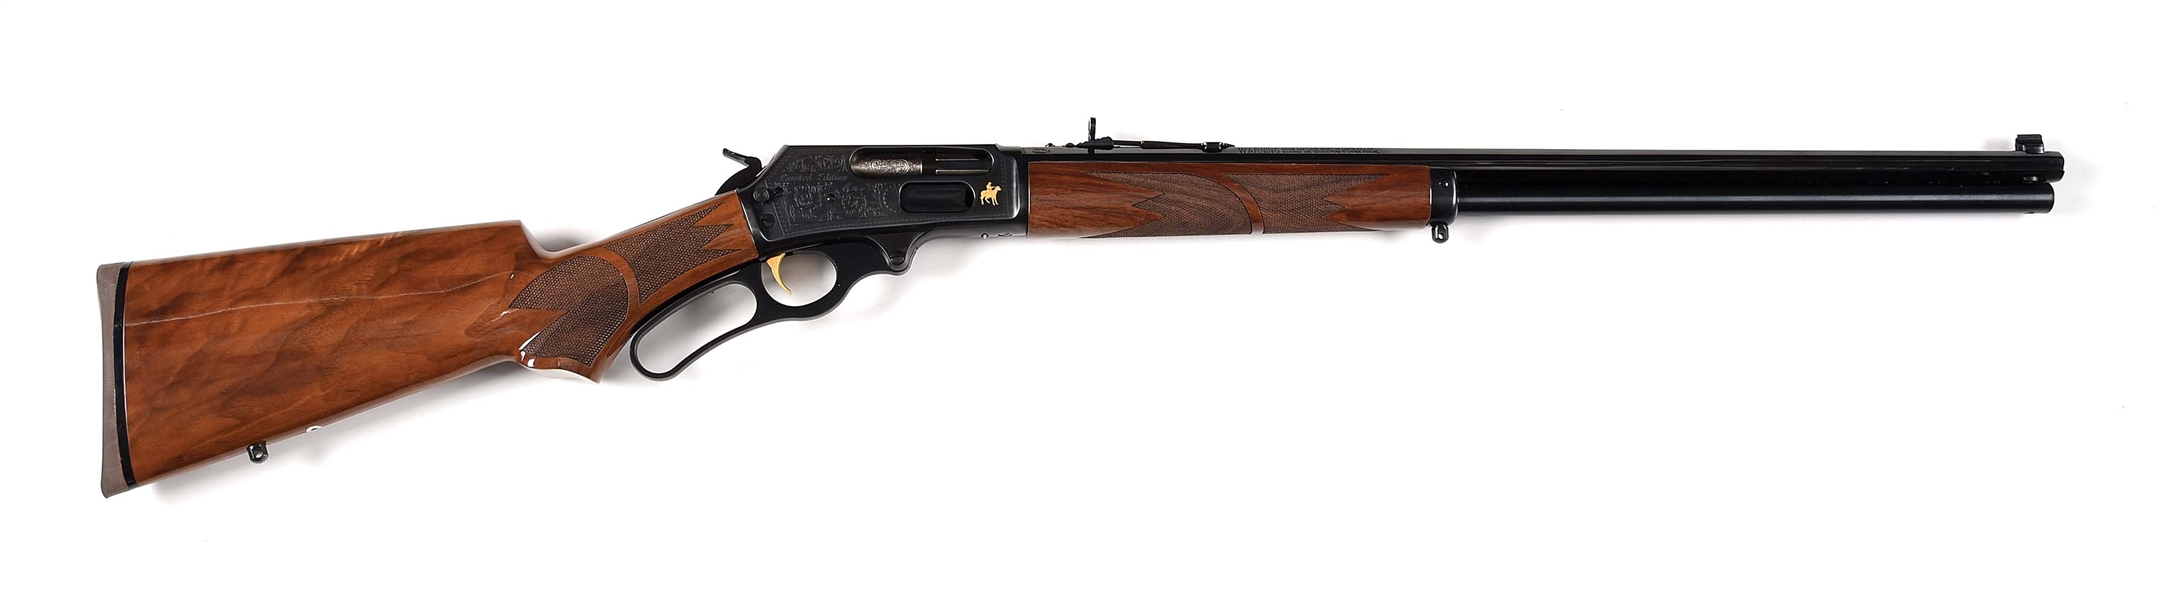 (M) MARLIN MODEL 1895 LIMITED EDITION LEVER ACTION RIFLE.